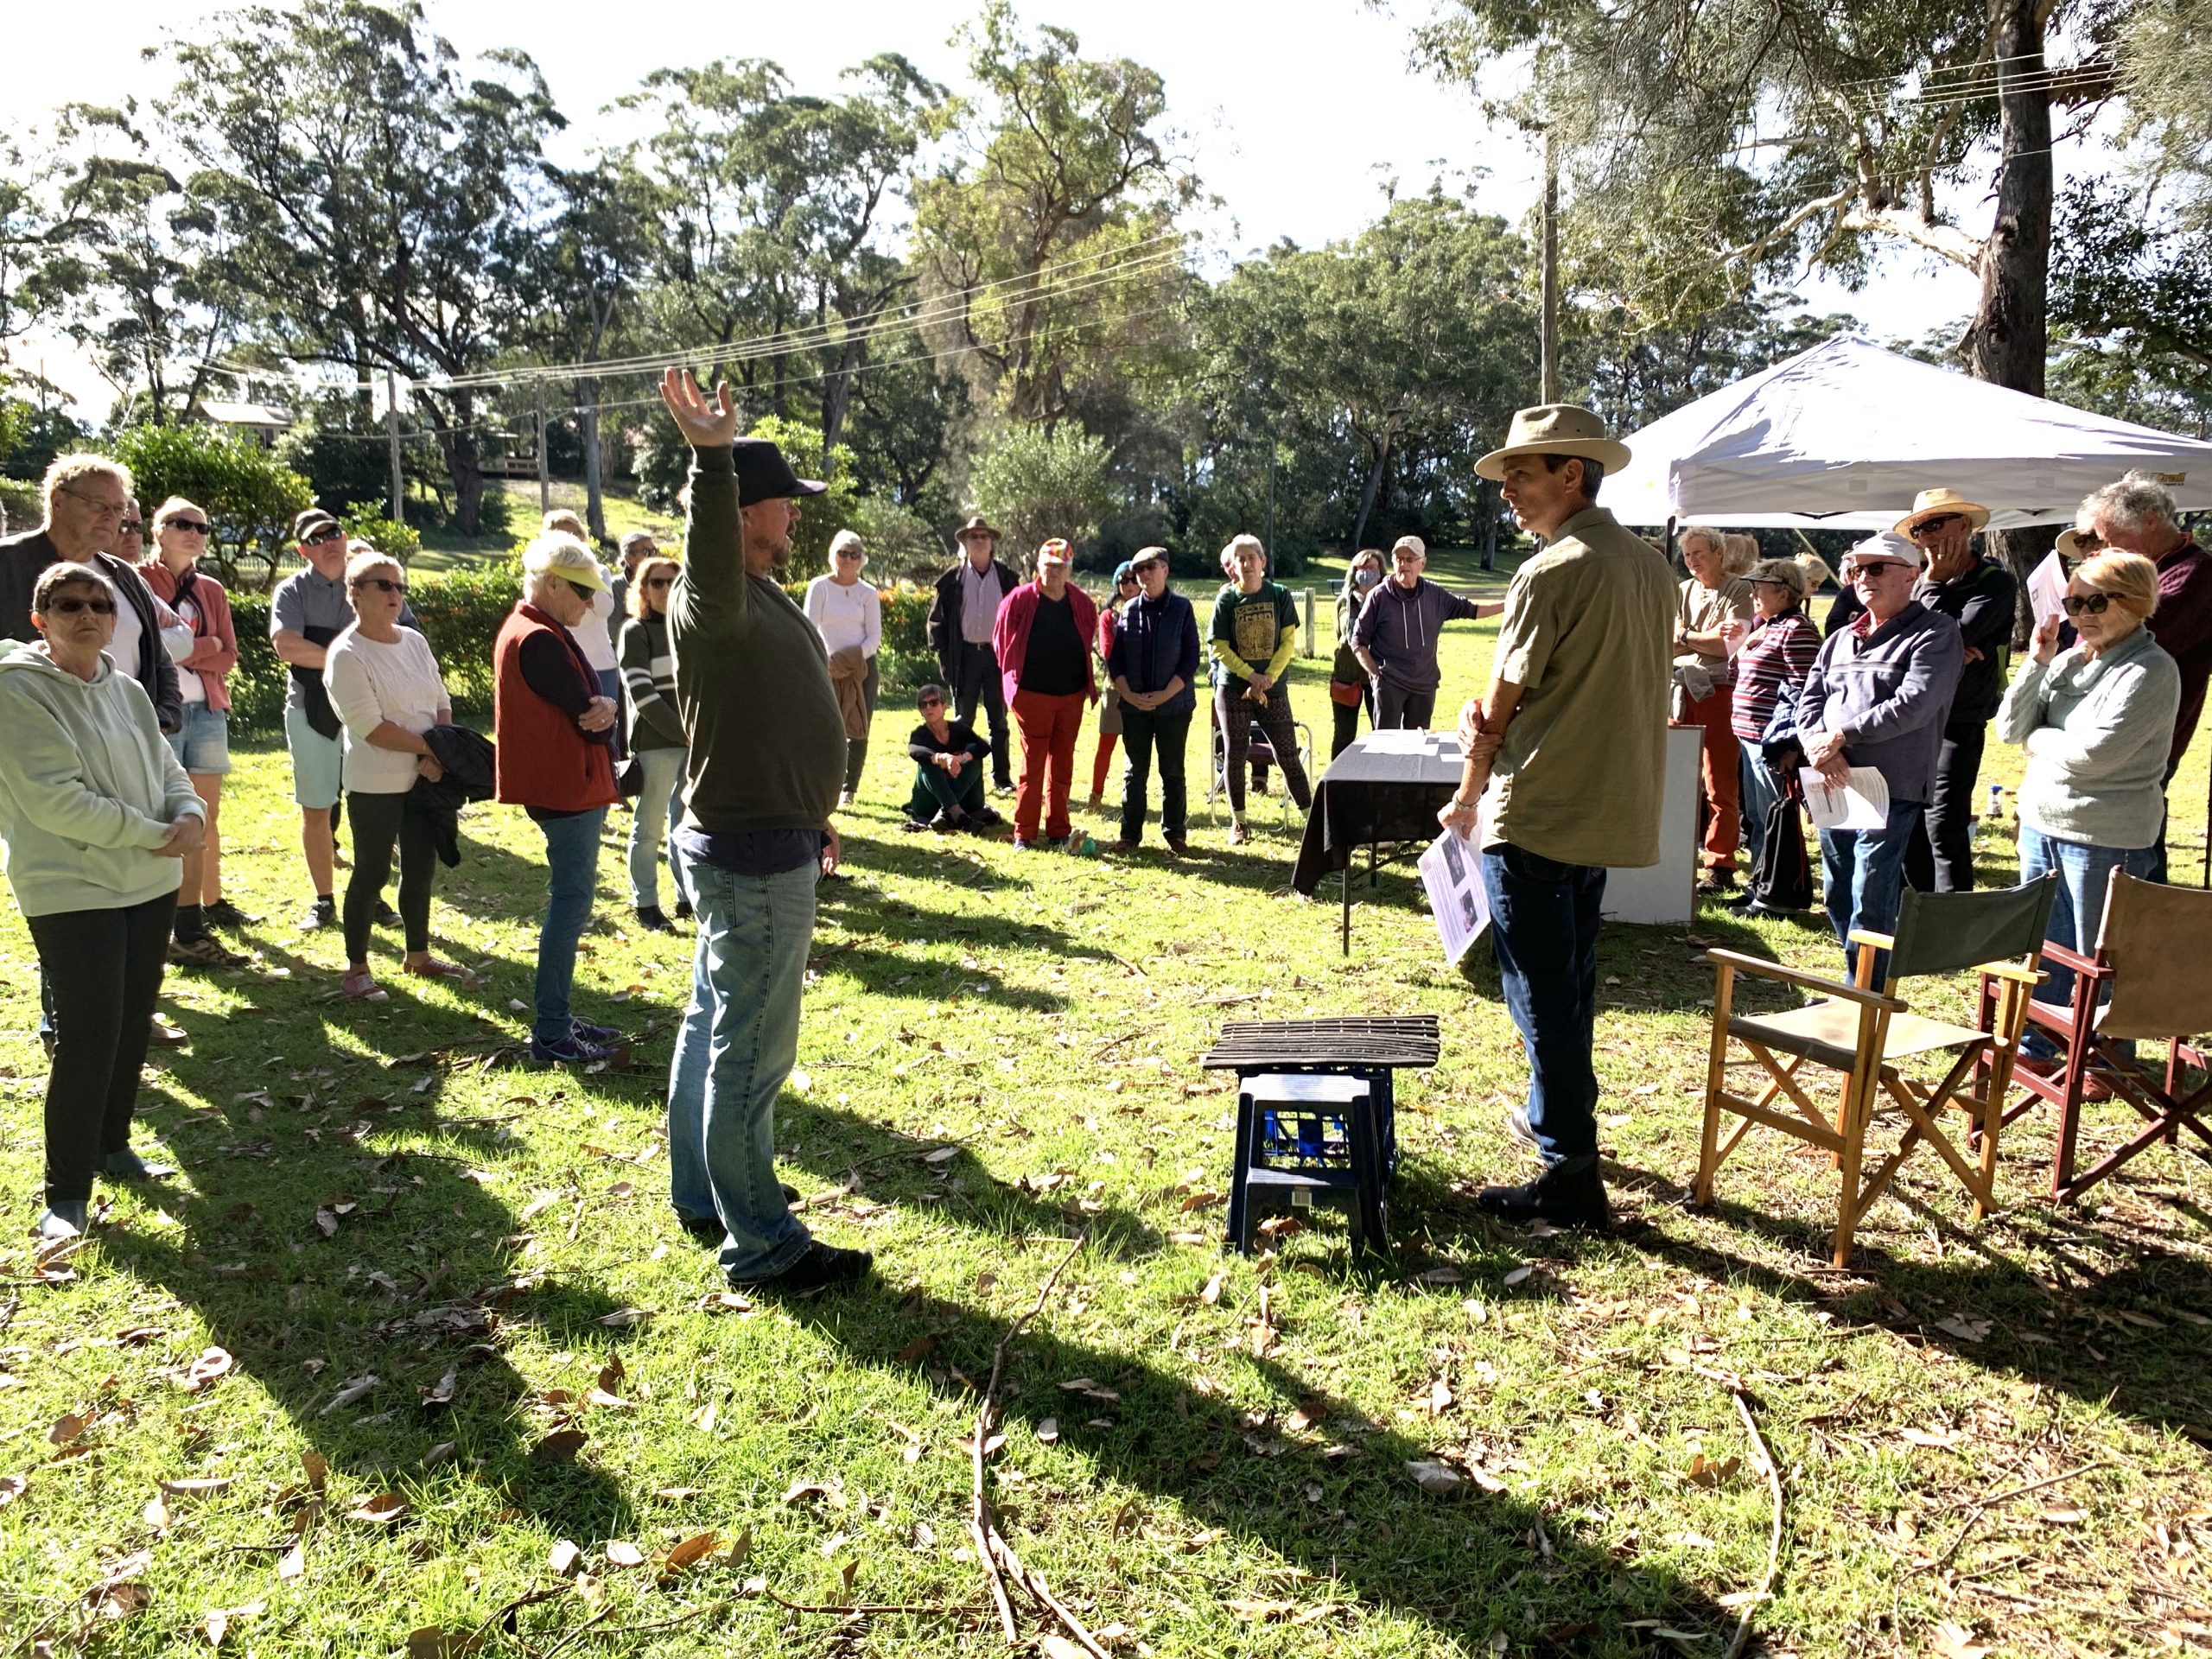 Our Future Shoalhaven at Moona Moona Creek development info day in June 2020